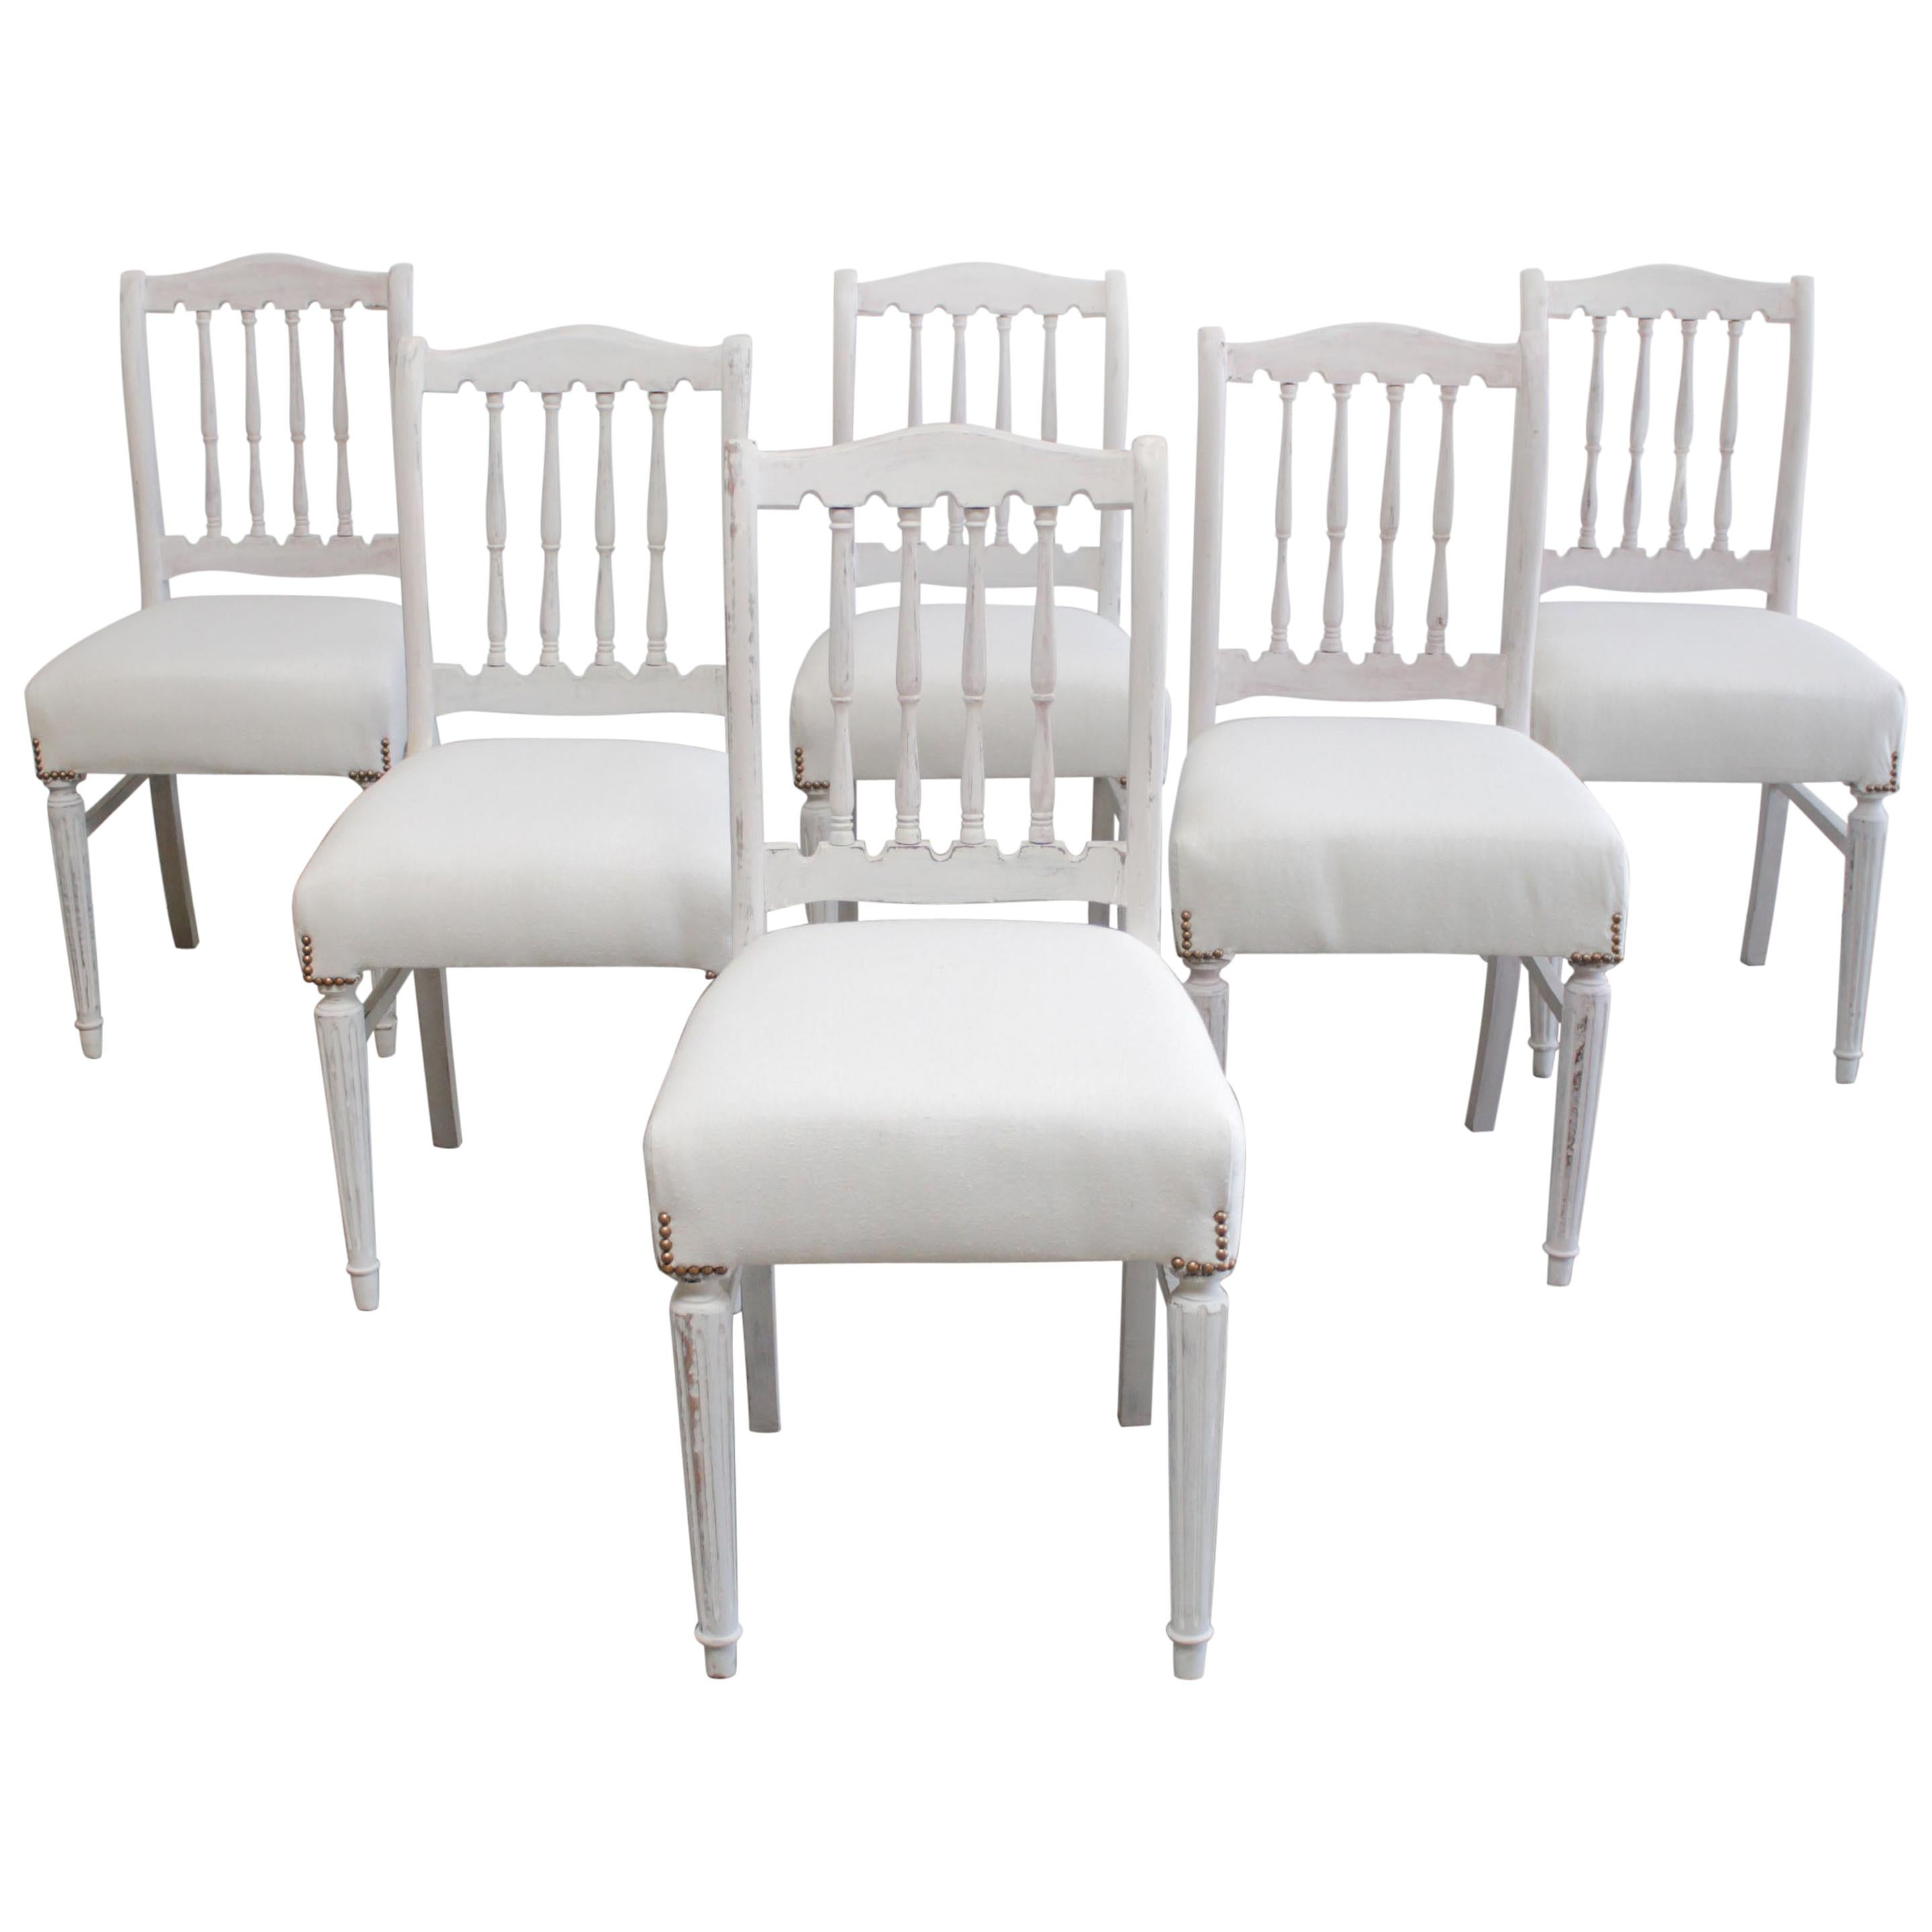 Set of 6 Vintage Painted and Upholstered Swedish Style Dining Chairs